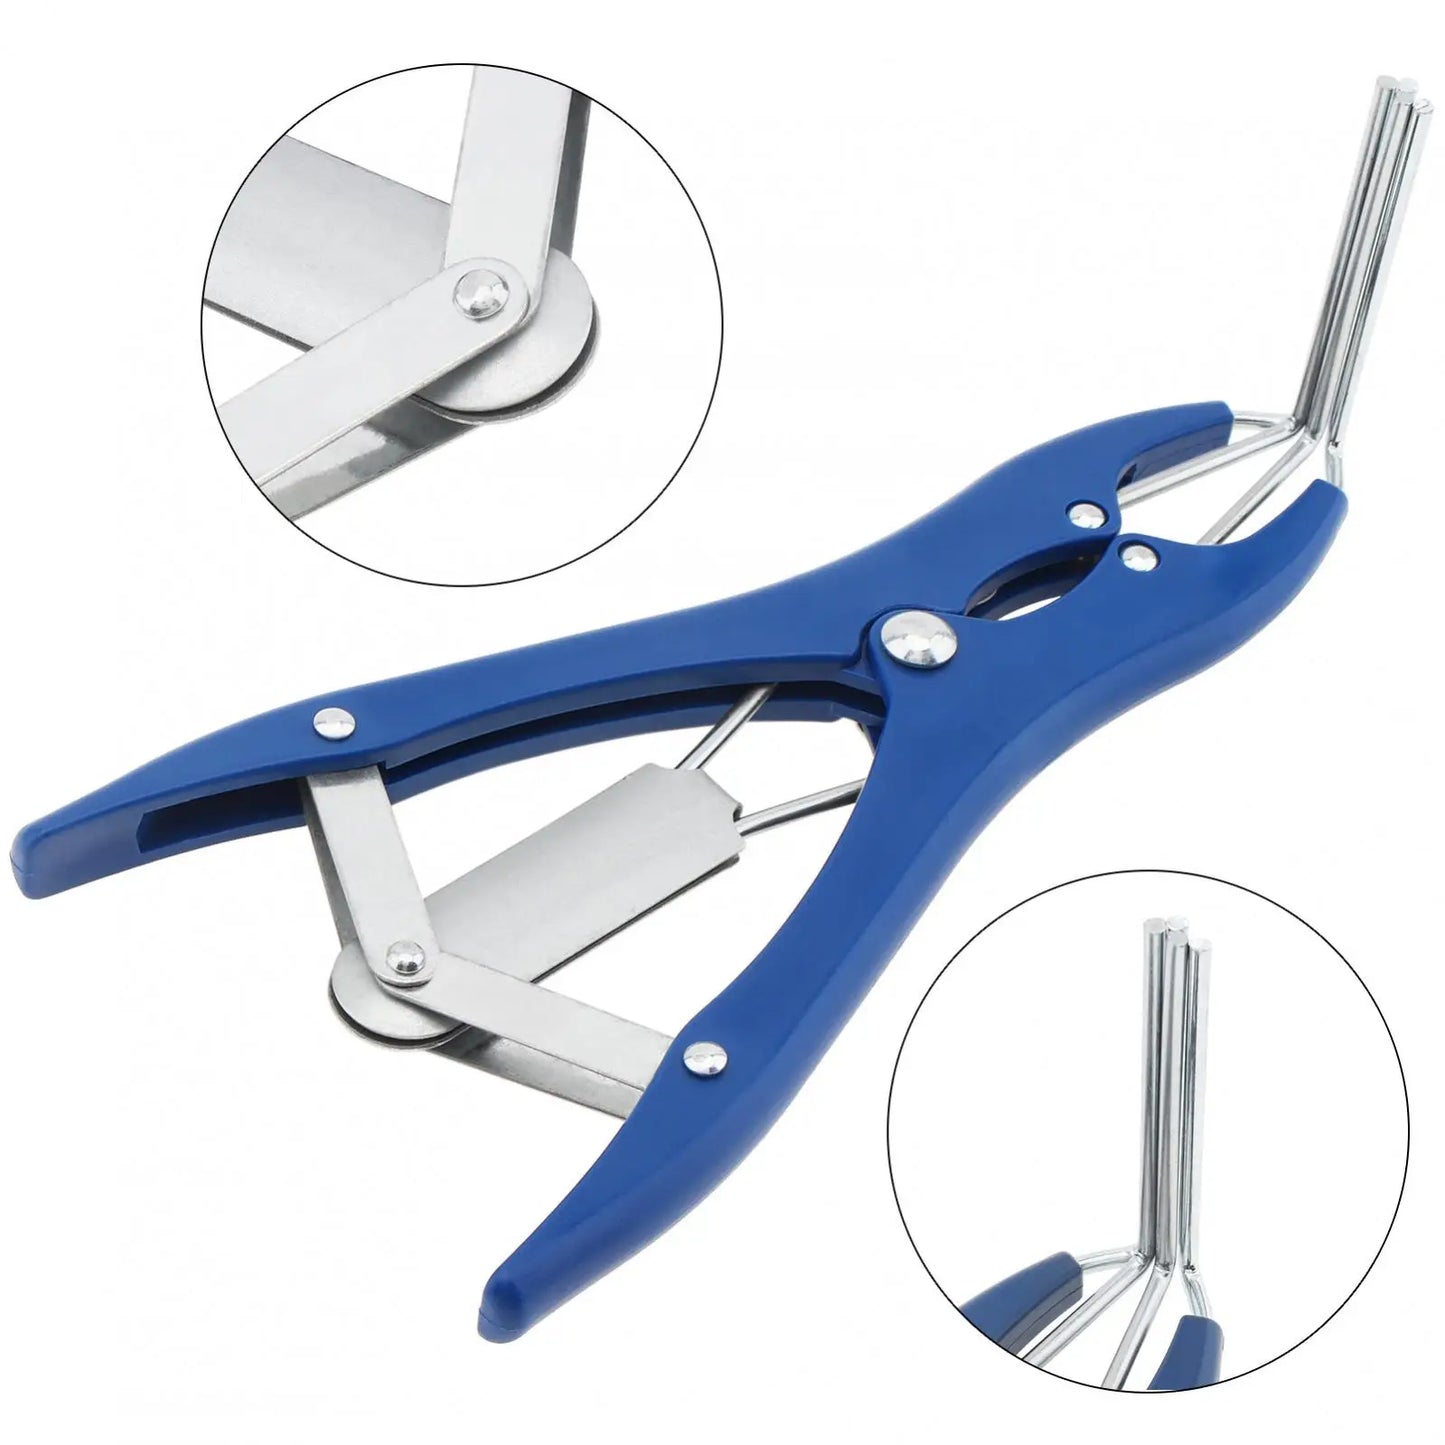 Stainless Steel Lengthen Balloon Expansion Pliers Sequin Filling Pliers Mouth Expander